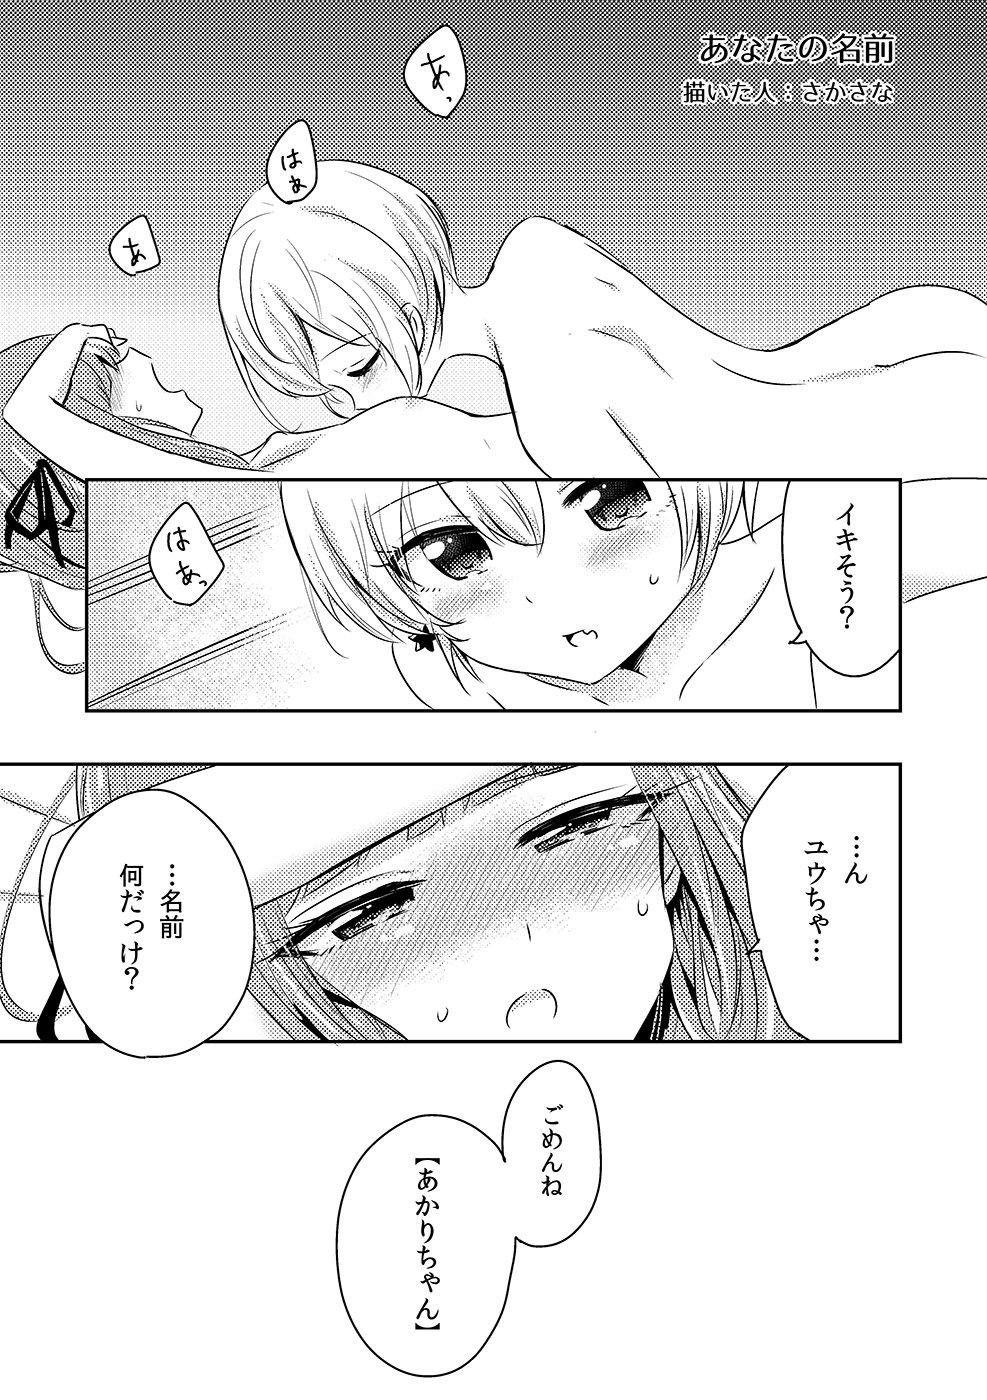 Large Who contributed to loveless sex joint two years ago! Yuusumi manga. - Aikatsu Whores - Page 1